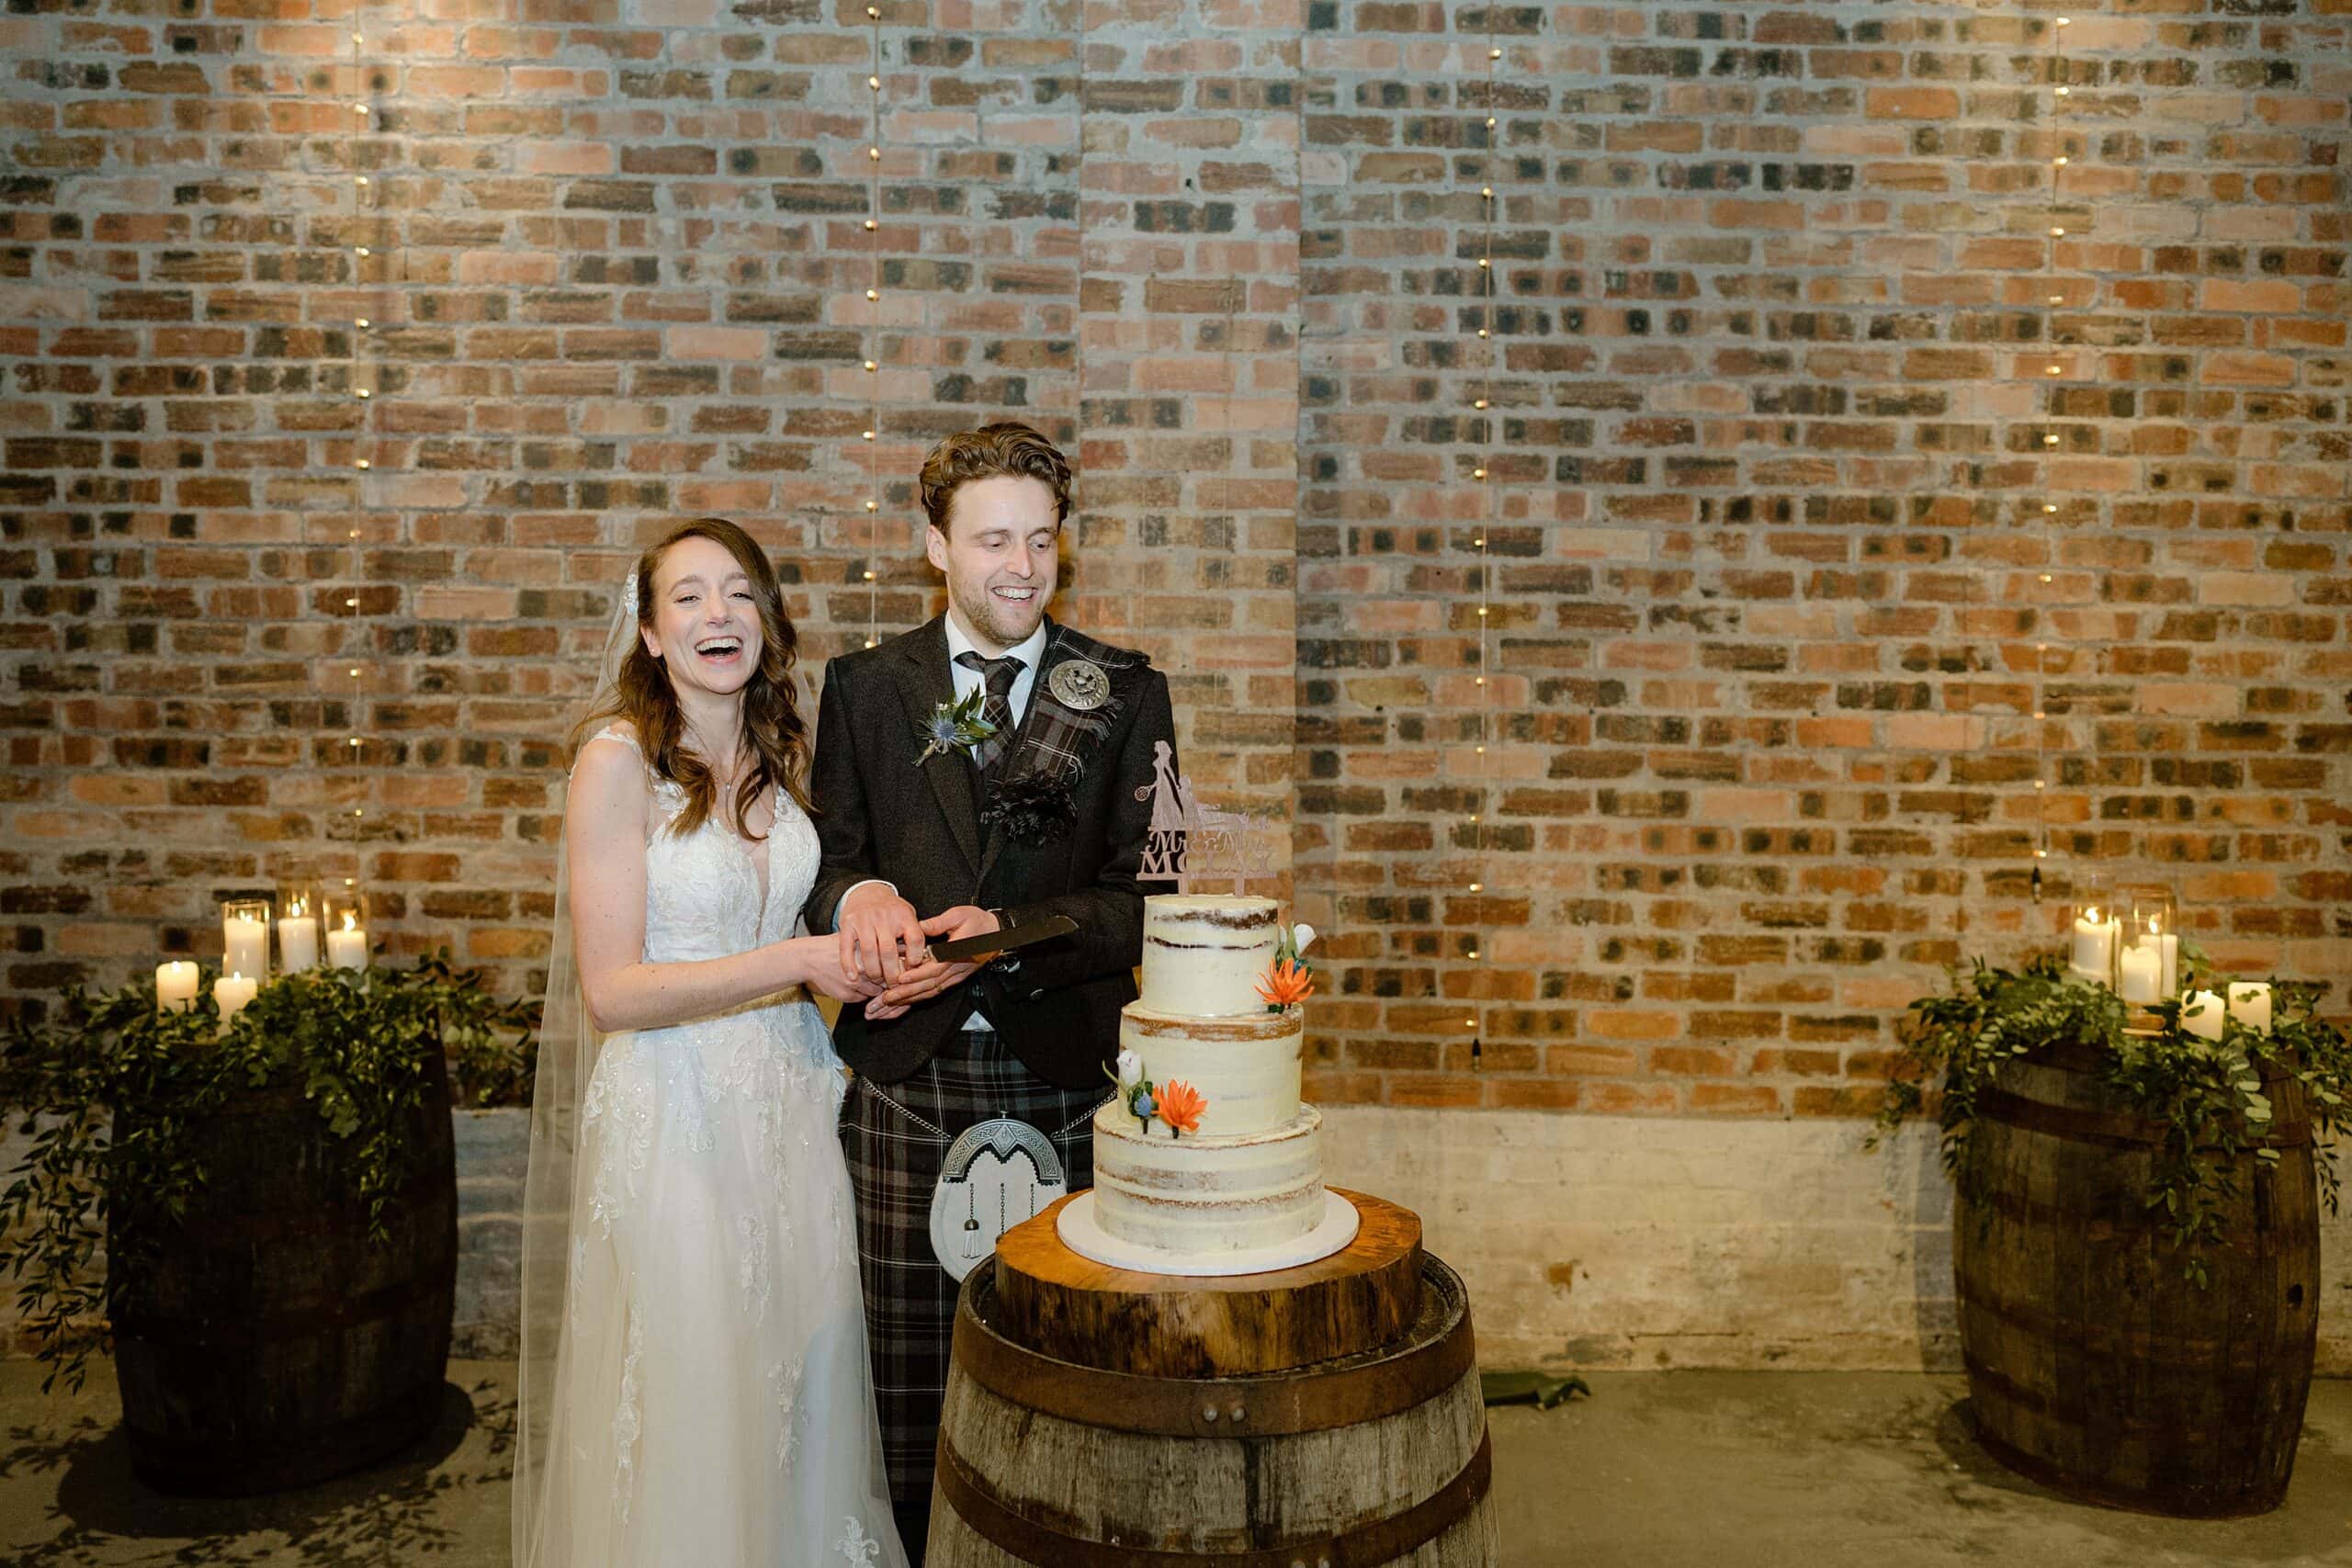 st andrews wedding photographer photographs the bride and groom smiling and cutting the wedding cake which sits on an oak barrel in front of a red brick wall and fairy lights